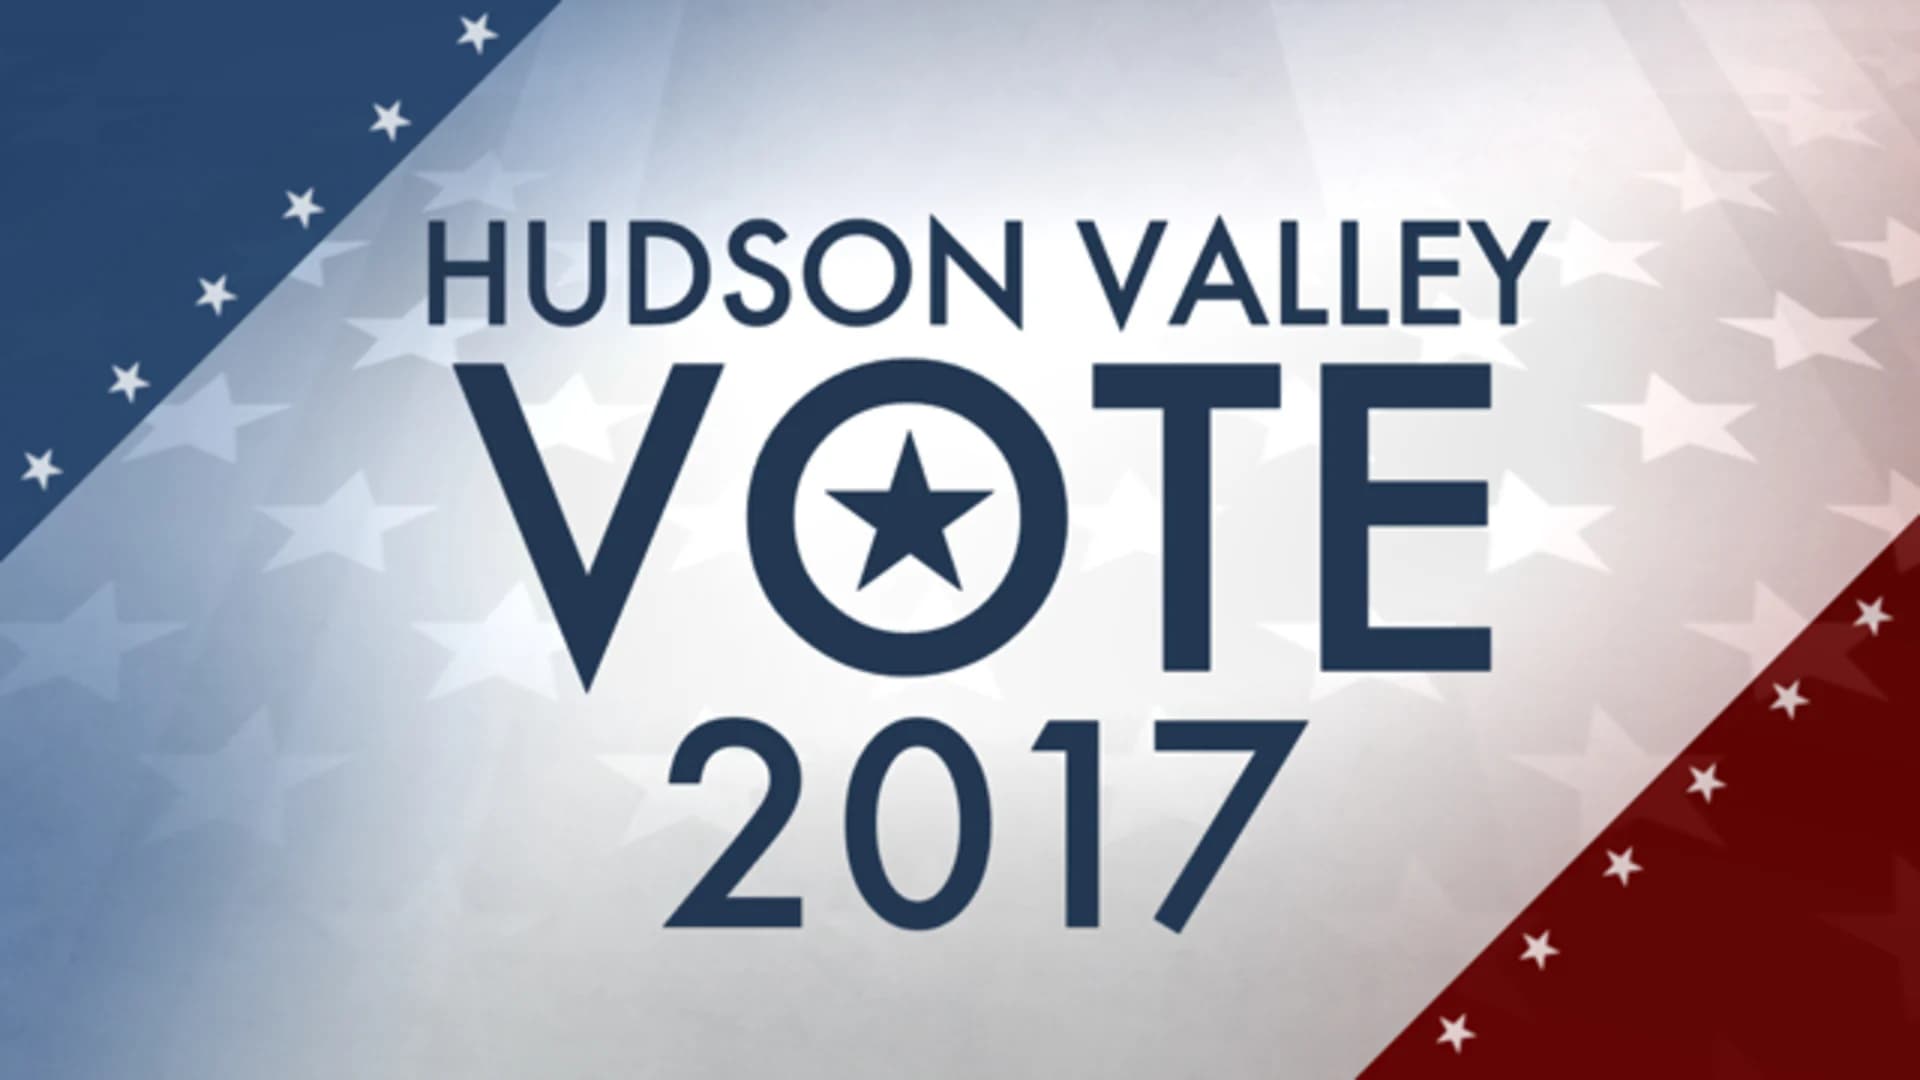 Hudson Valley Vote 2017: Complete Results and Coverage